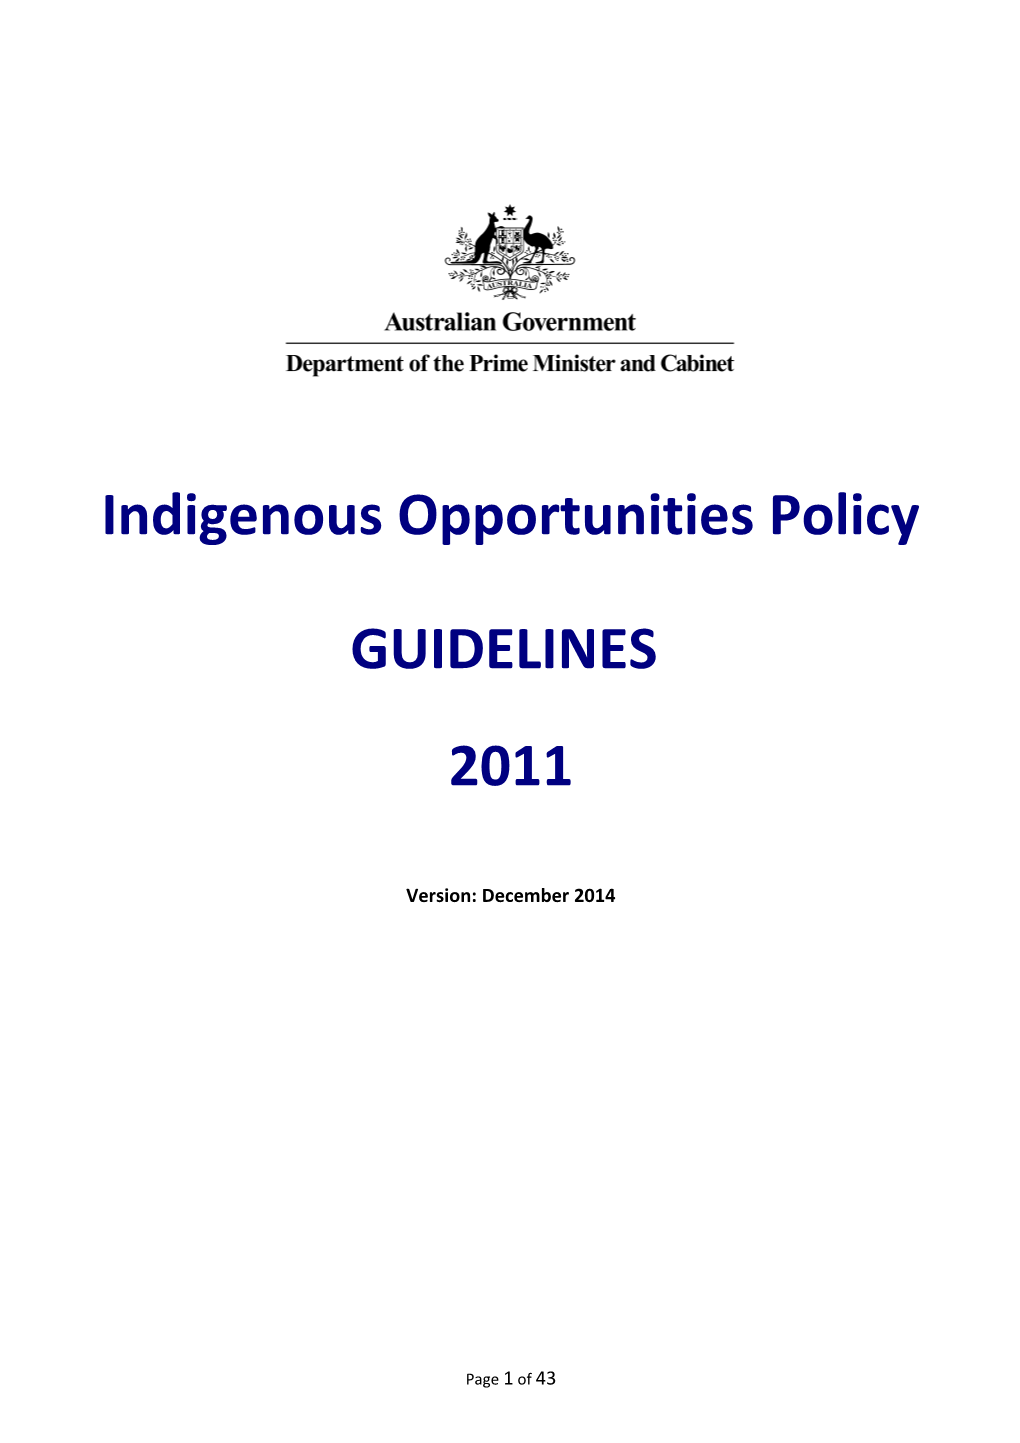 Indigenous Opportunities Policy